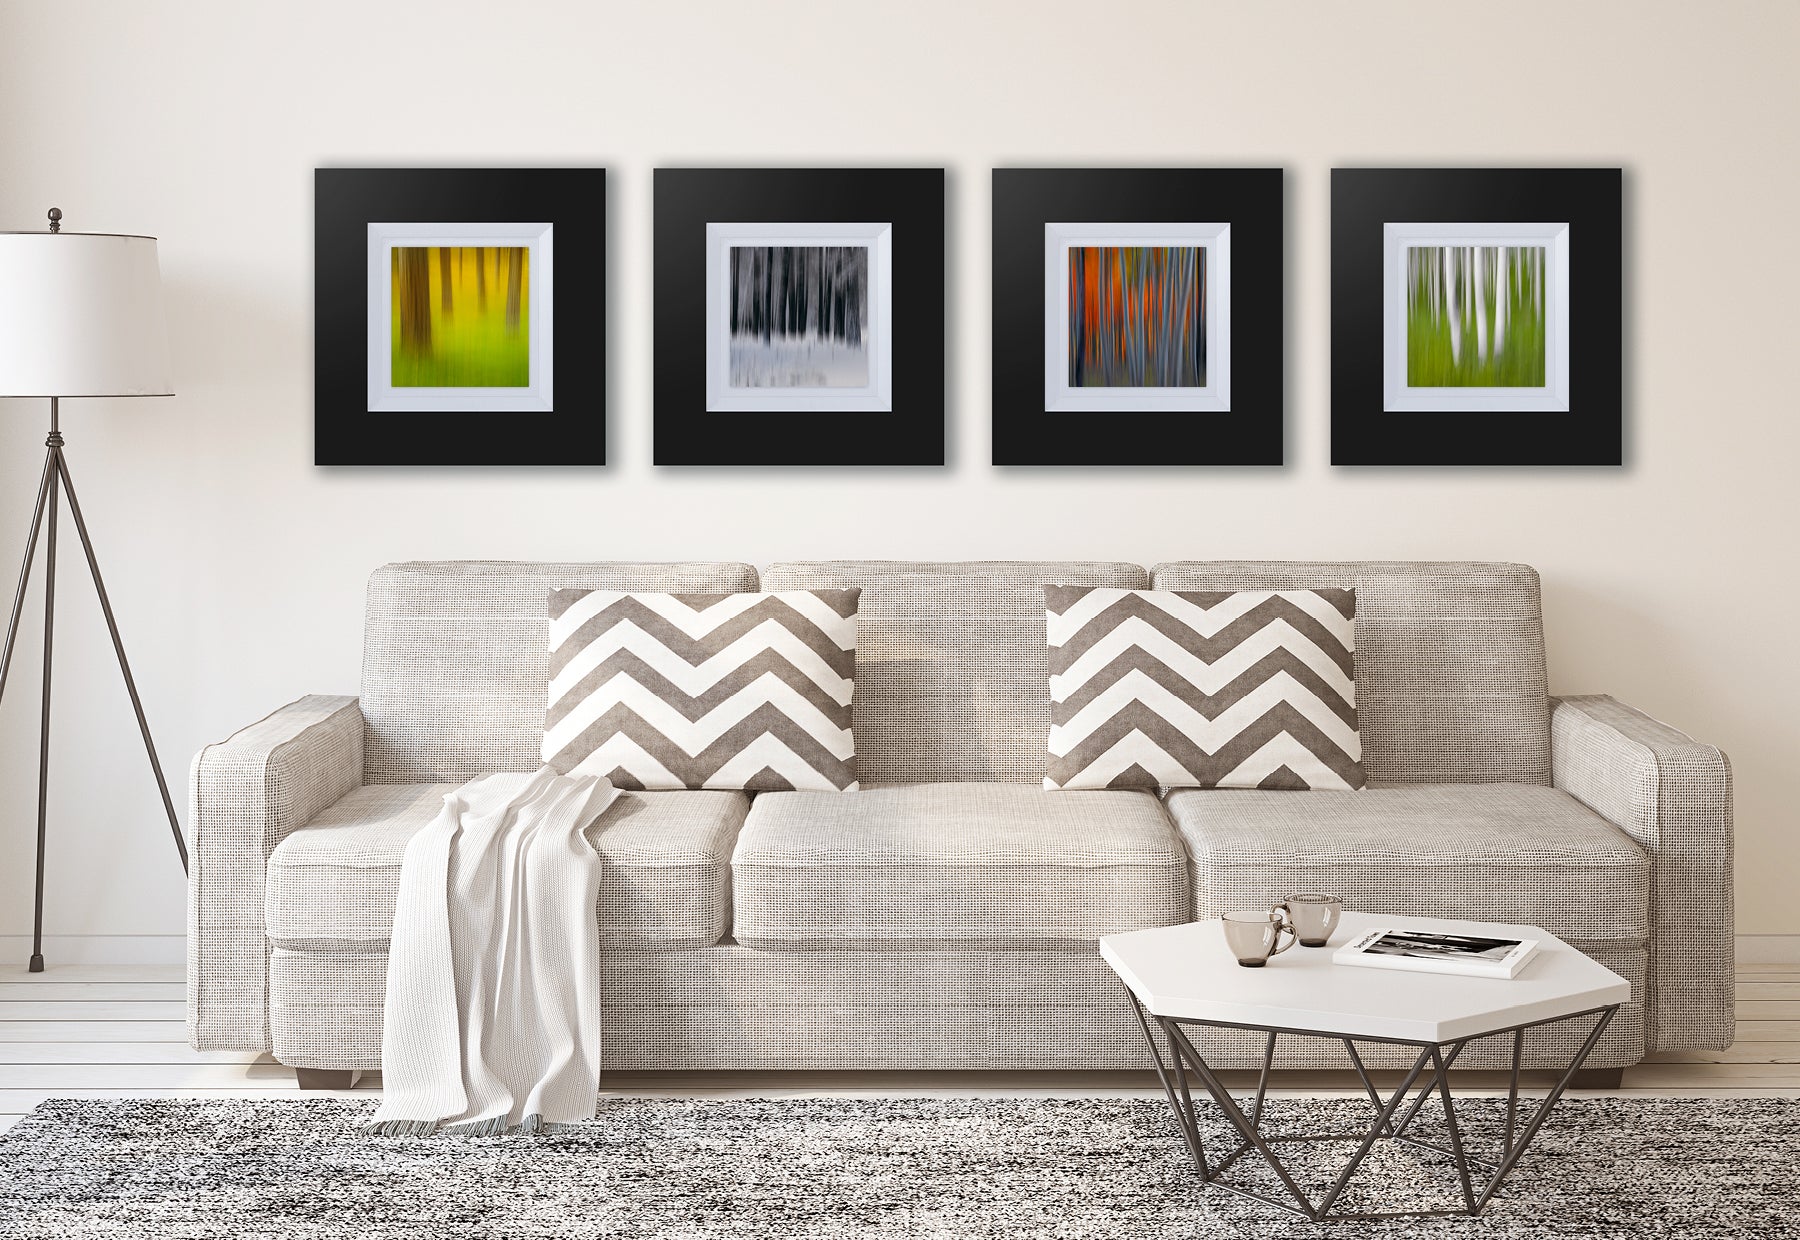 Living room with gray couch and white table featuring four framed square photographs of blurred Aspen trees by Peter Lik in dark brown frames with white linen liners